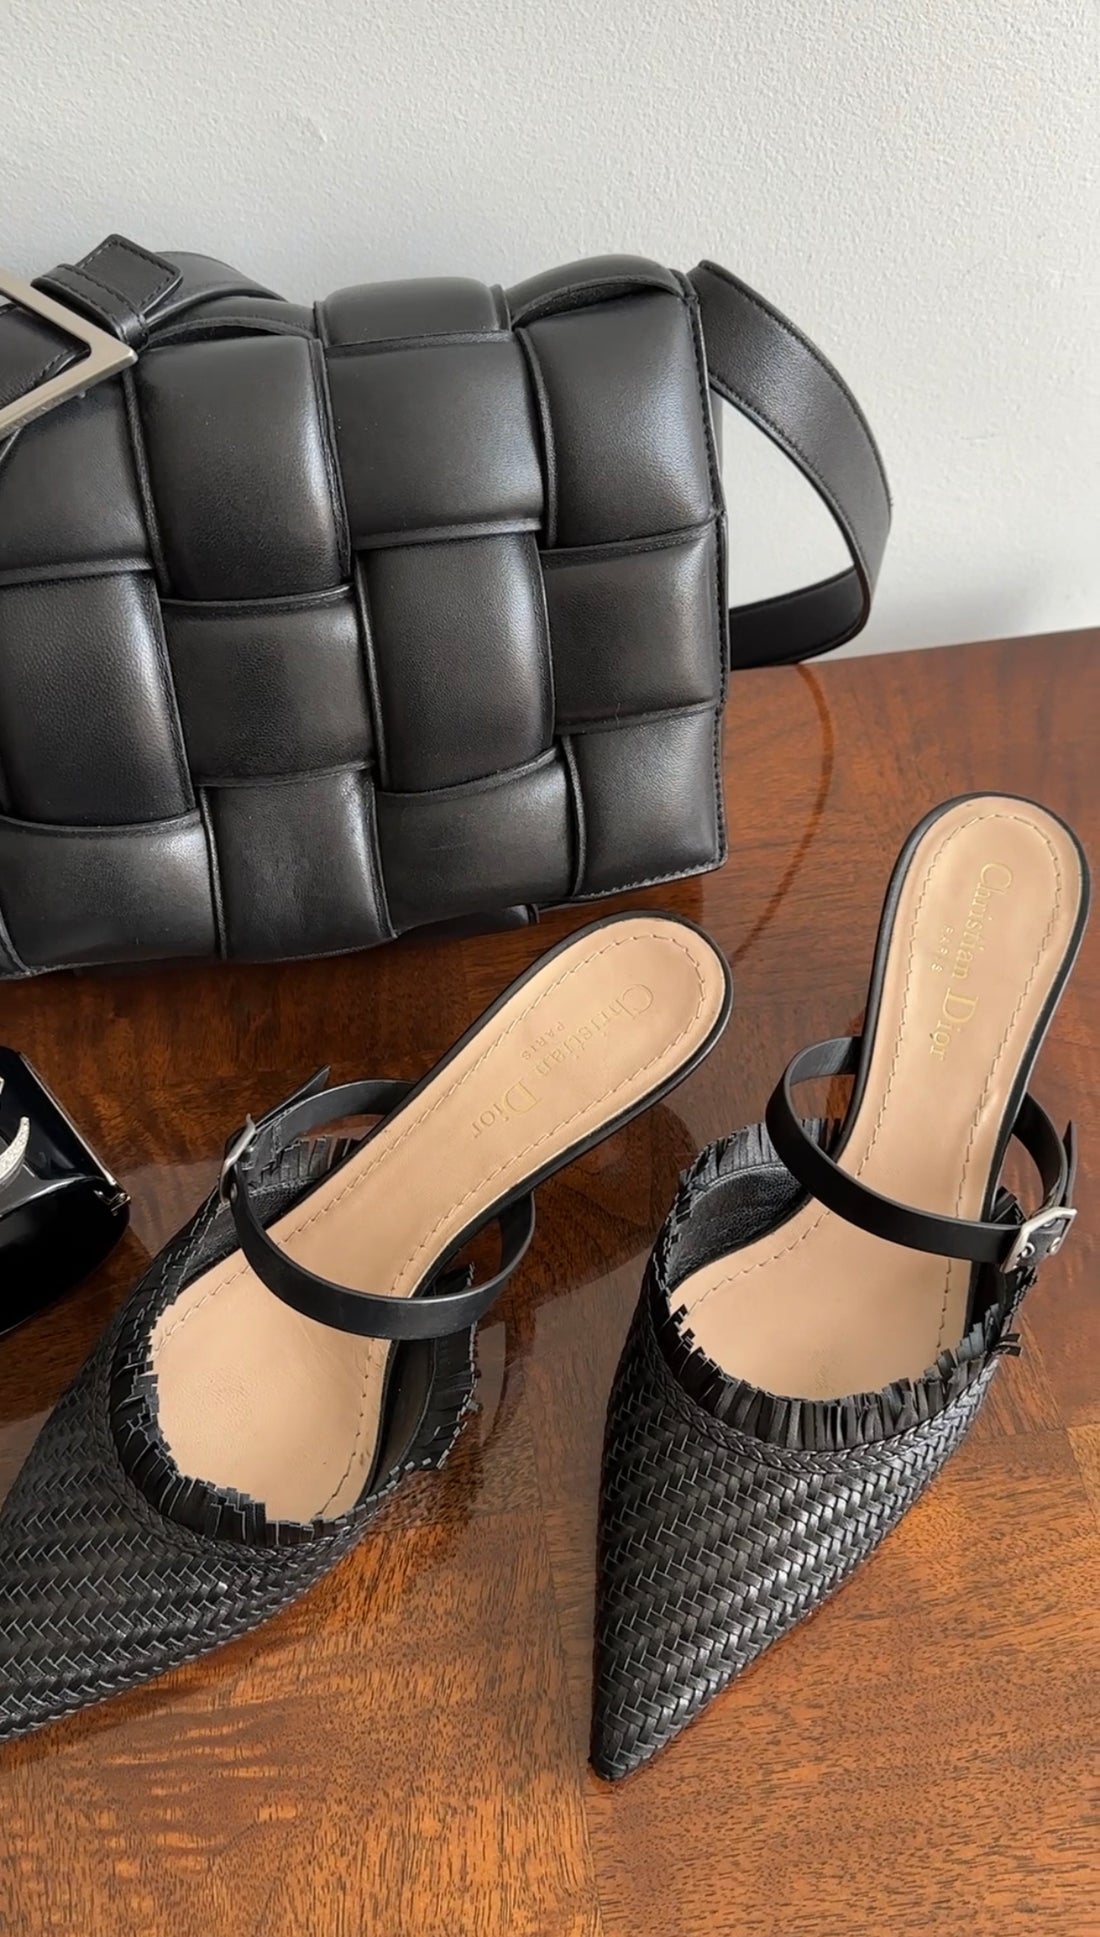 Christian Dior Black Leather Pointed Woven Mules - 8.5